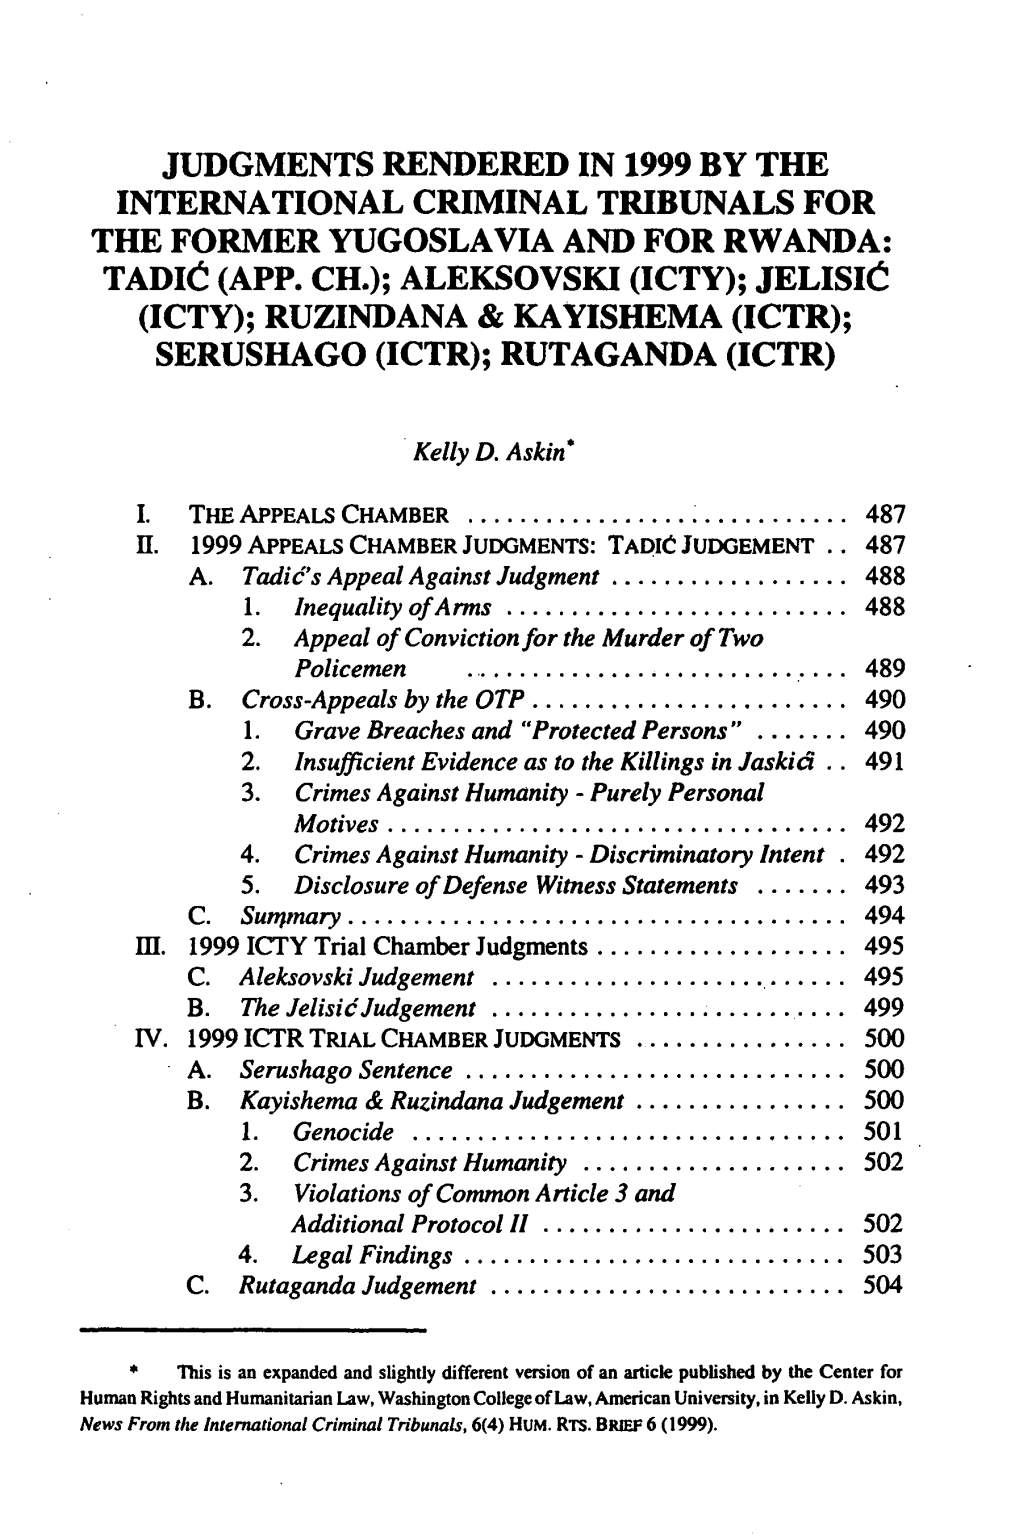 Judgments Rendered in 1999 by the International Criminal Tribunals for the Former Yugoslavia and for Rwanda: Tadio- (App